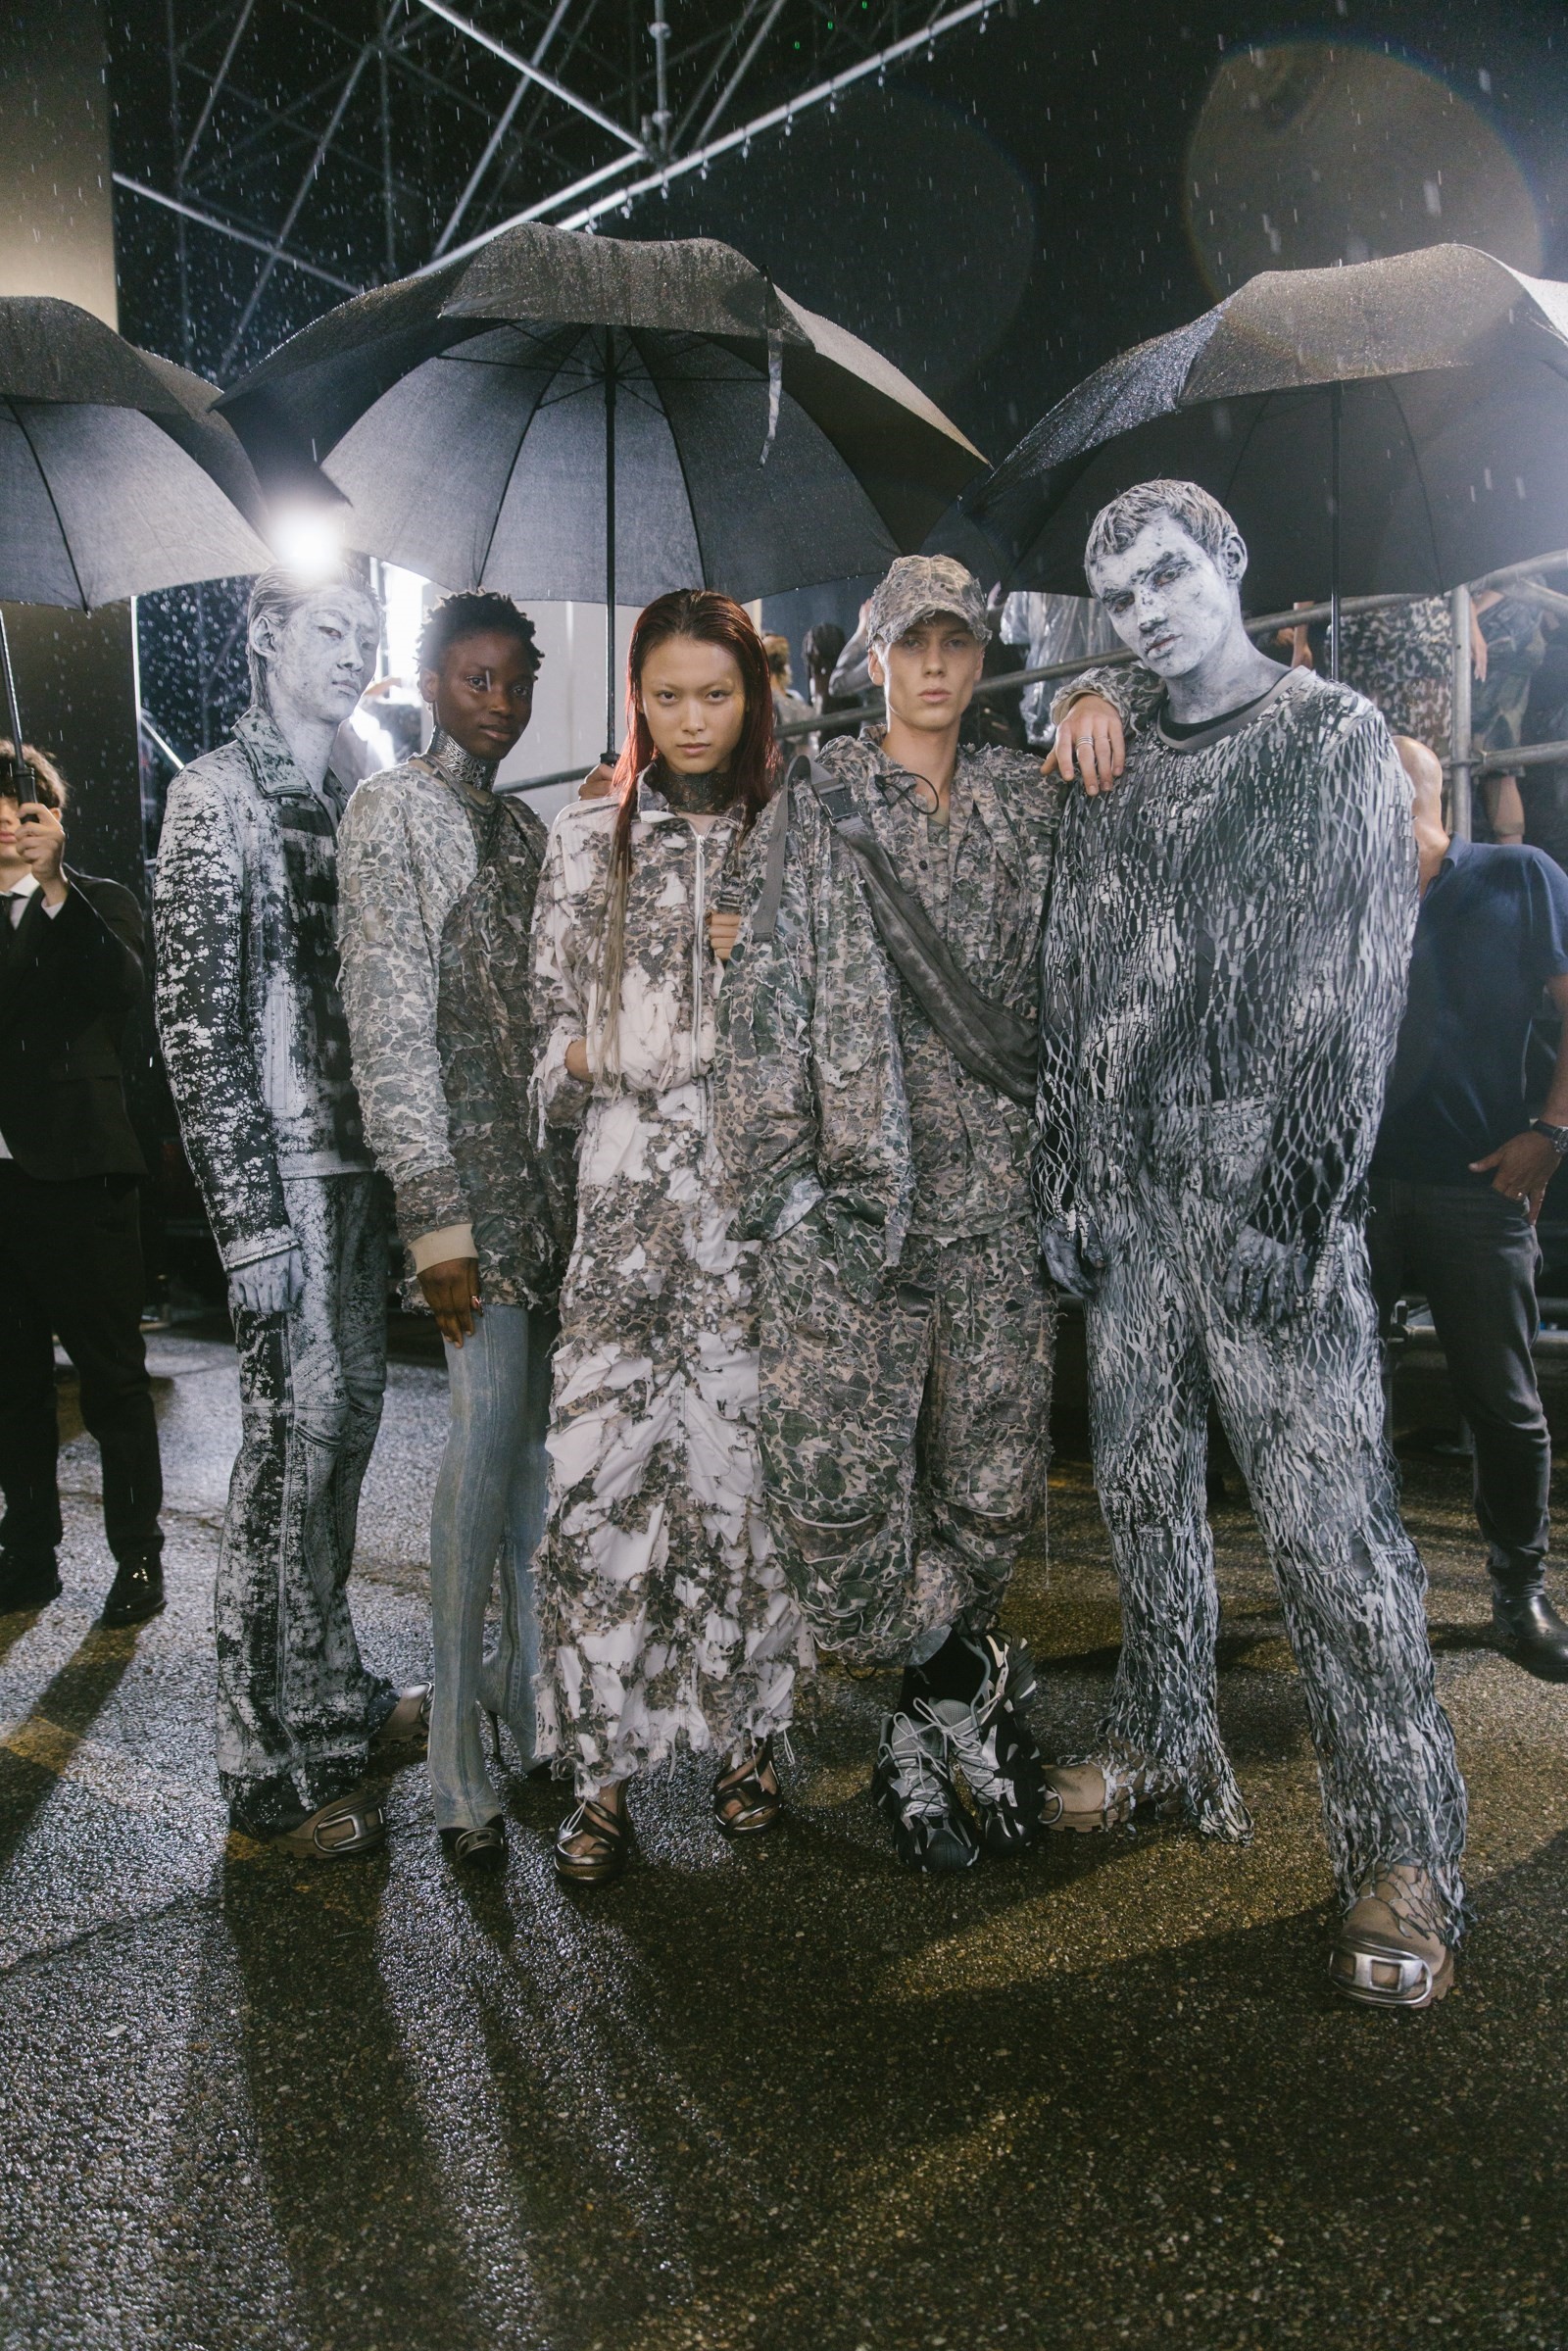 Dazed CliffsNotes: a guide to everything going down at Paris Fashion Week  Womenswear